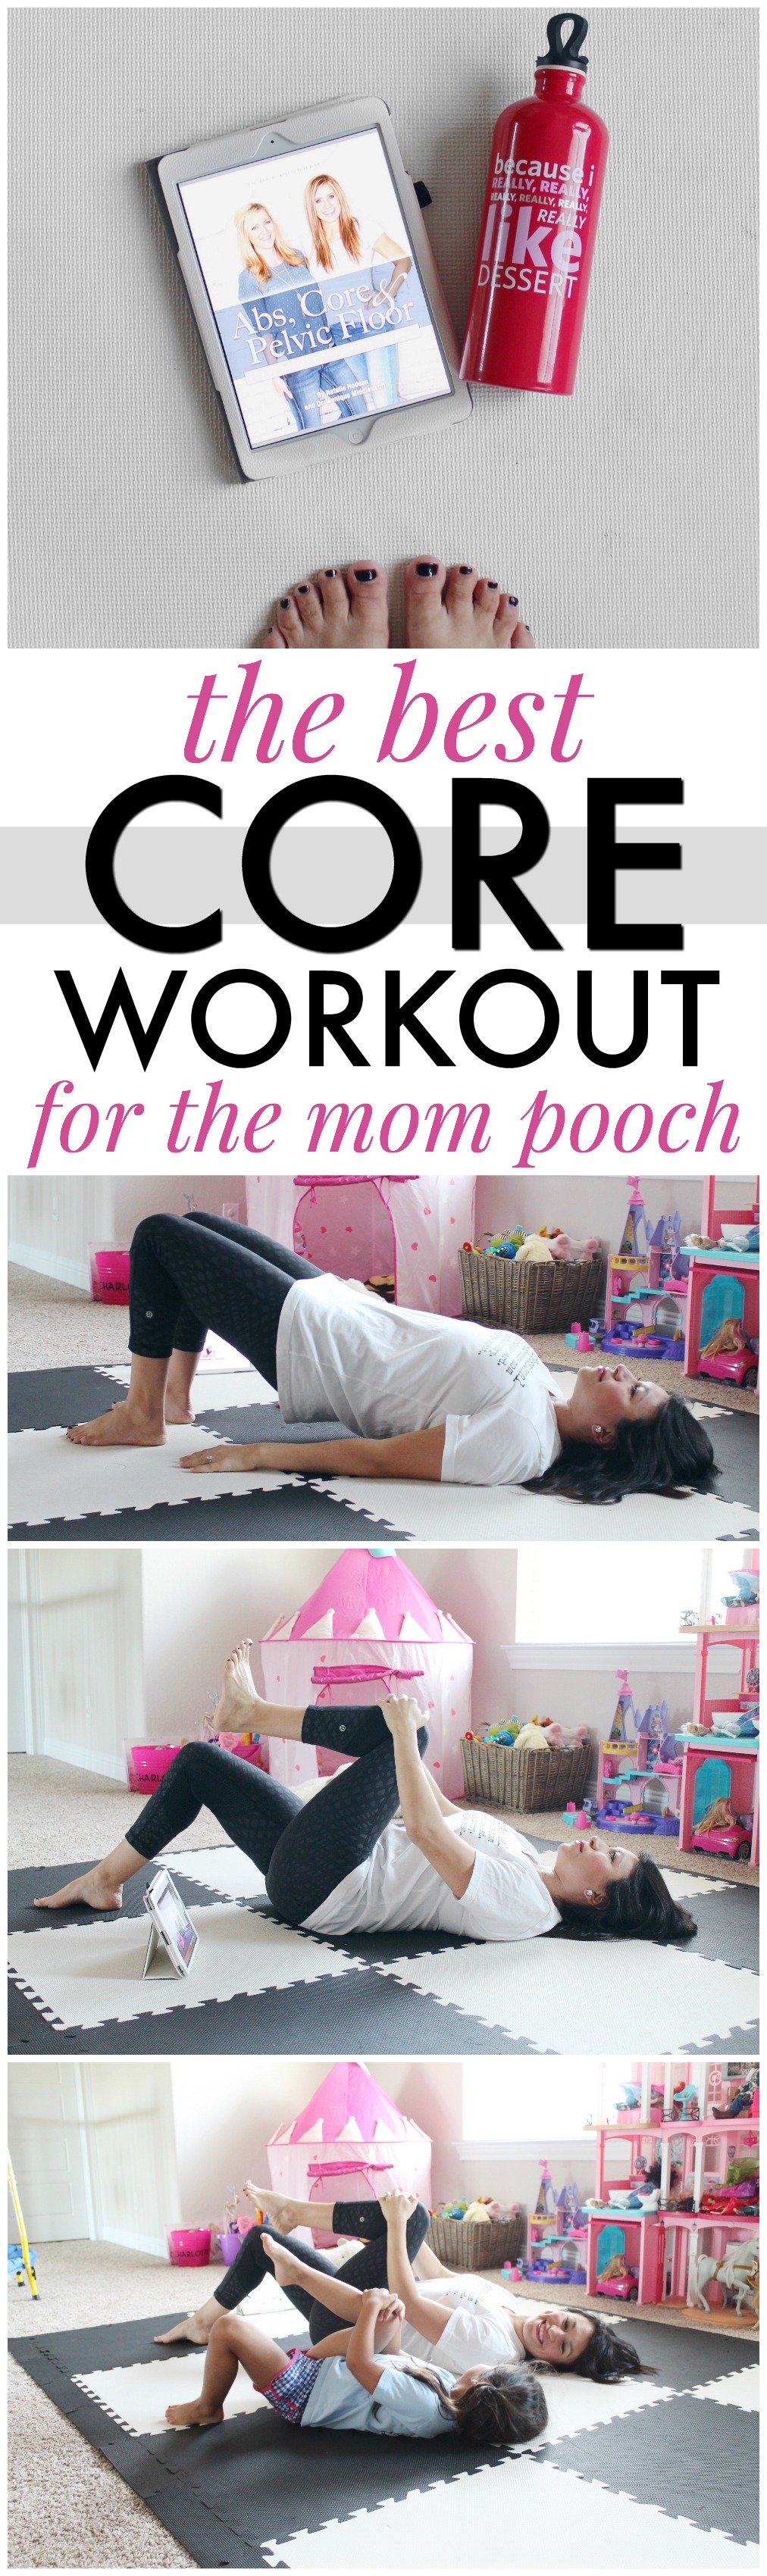 The best core workout for the mommy pooch, also known as Diastasis Recti. A great 30 day at-home workout series and program by Natalie Hodson and Dr. Middlekauff to get your abdomen back in shape!